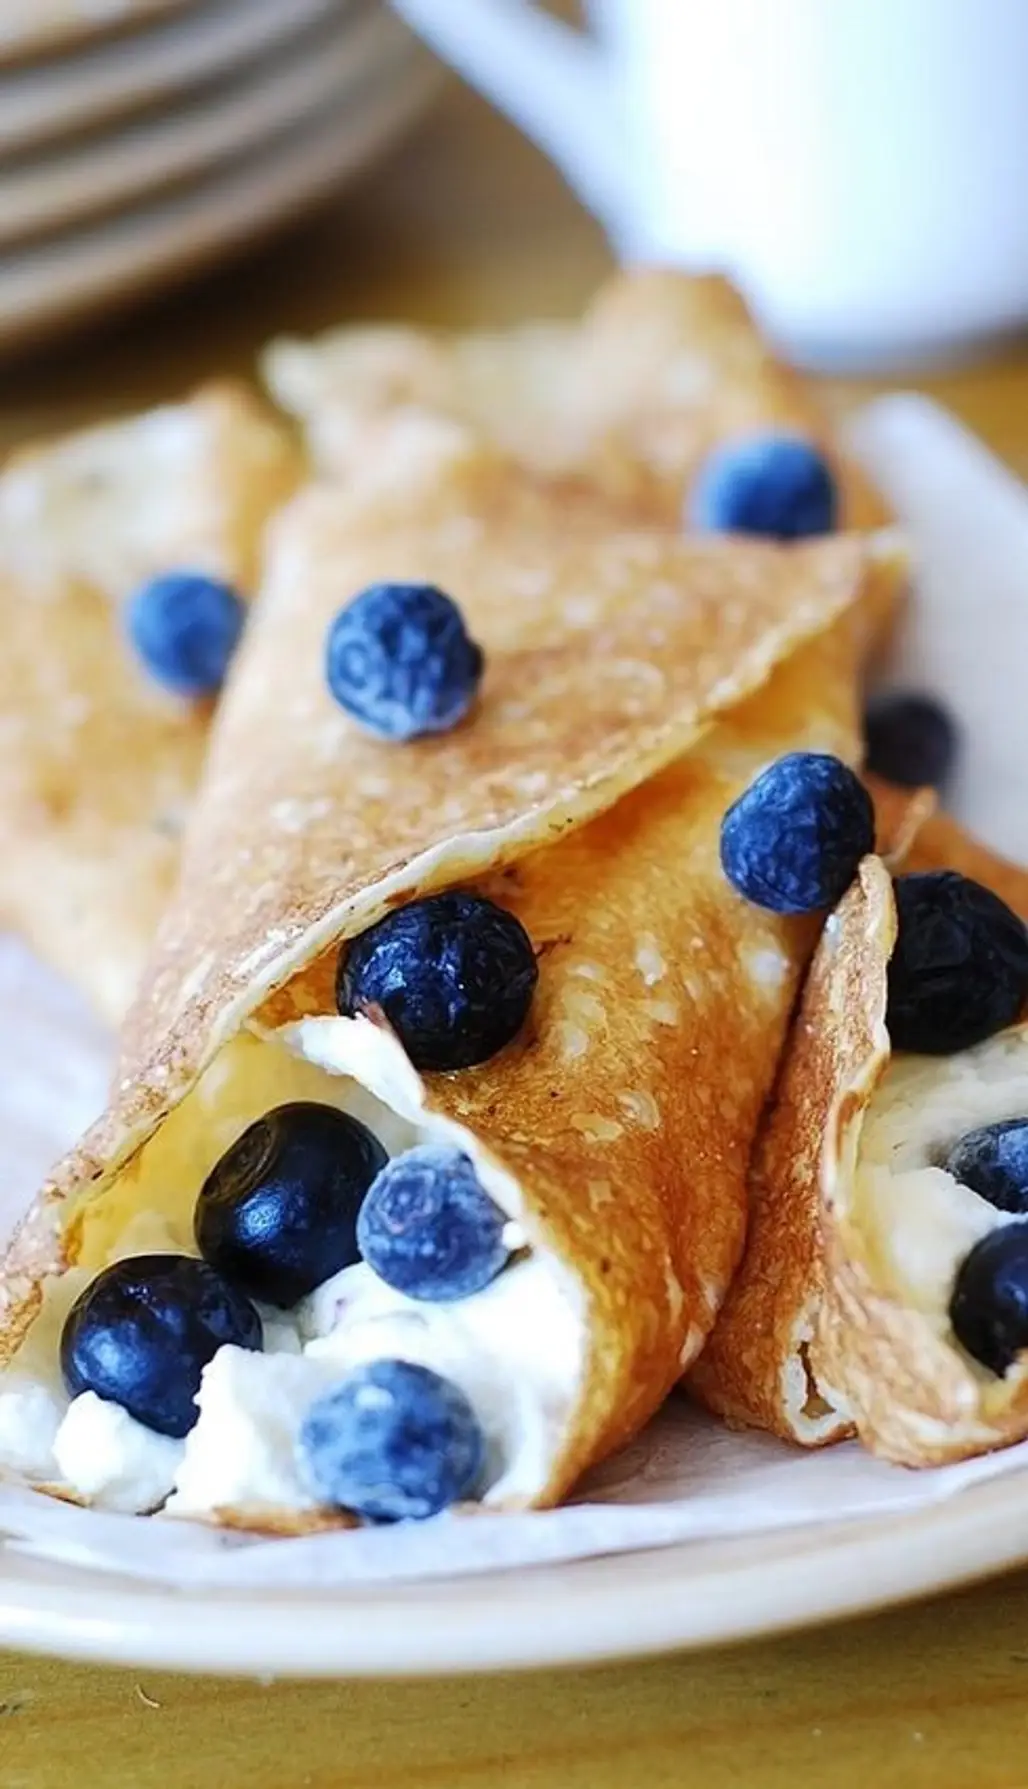 Crêpes with Sweetened Ricotta Cheese Filling and Blueberries